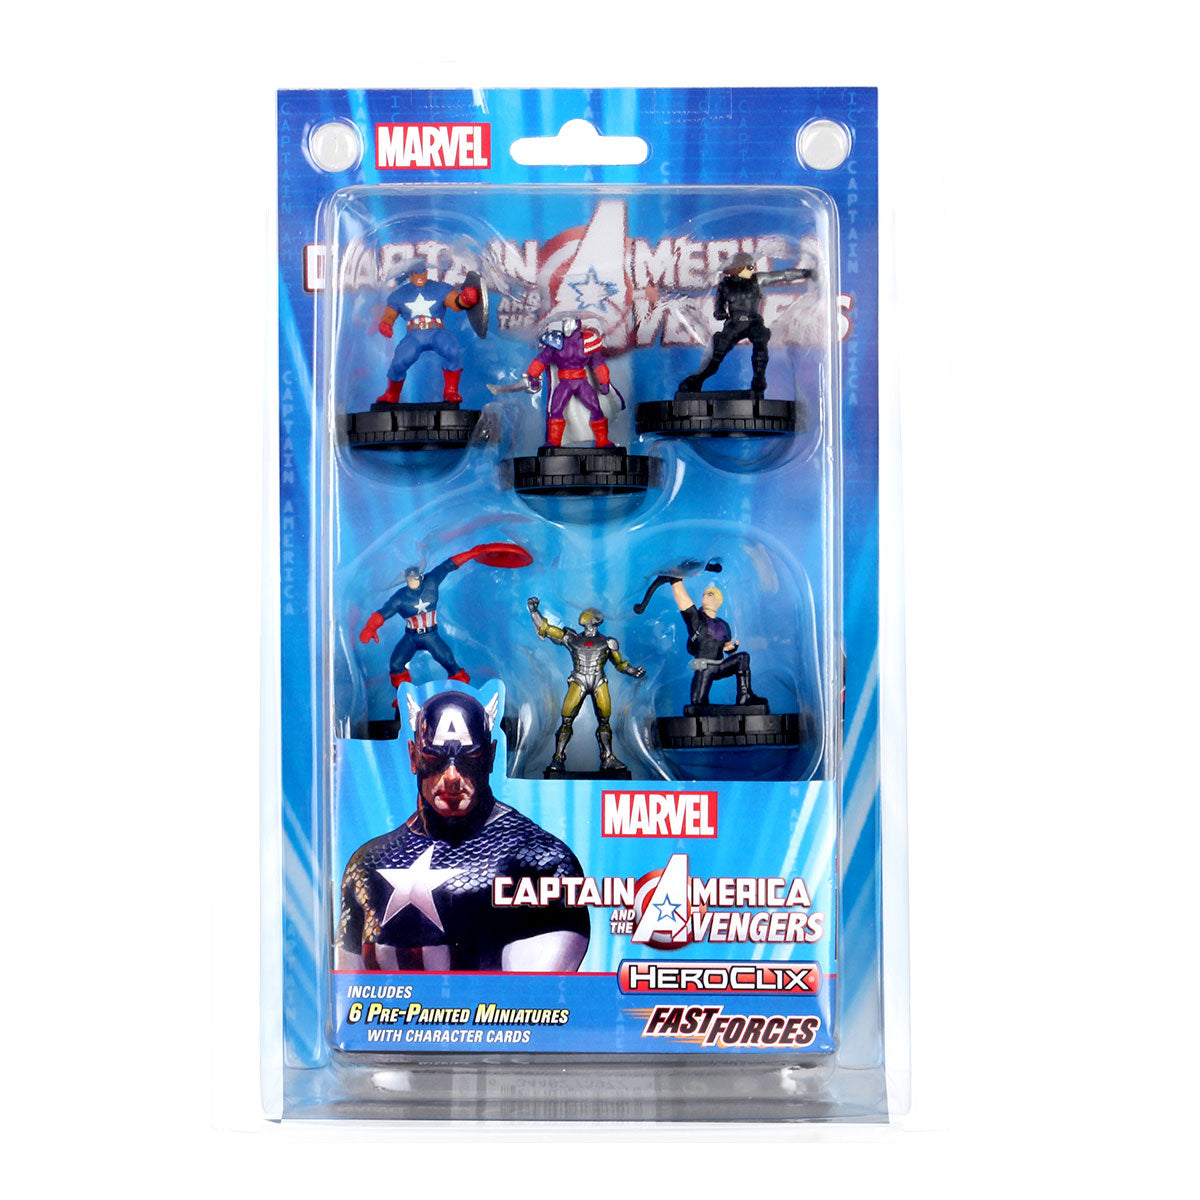 HeroClix: Captain America and the Avengers Fast Forces